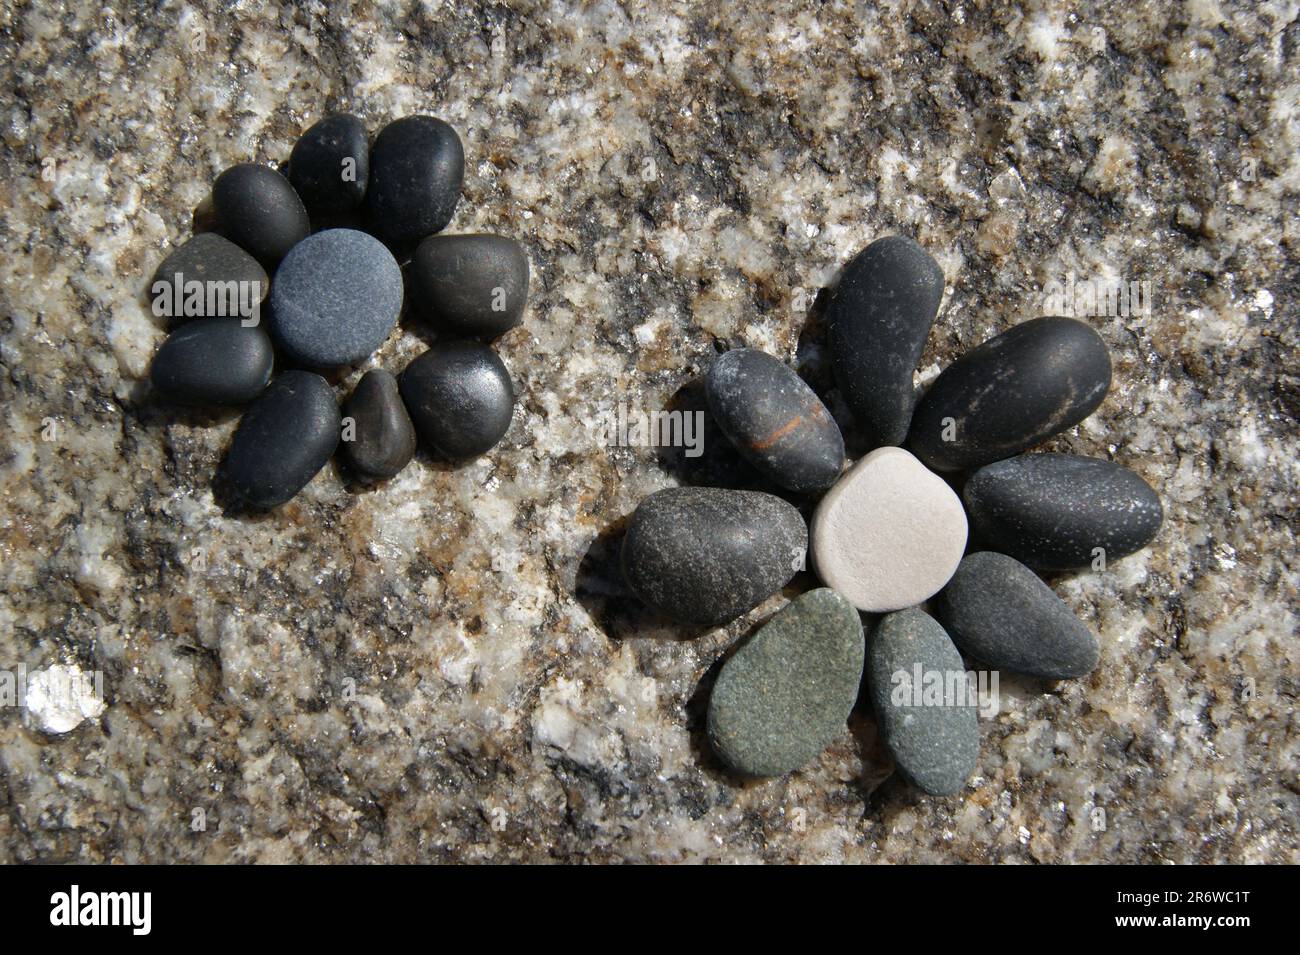 Stone garden decors. A flowers laid out of pebbles on a stone. Stock Photo